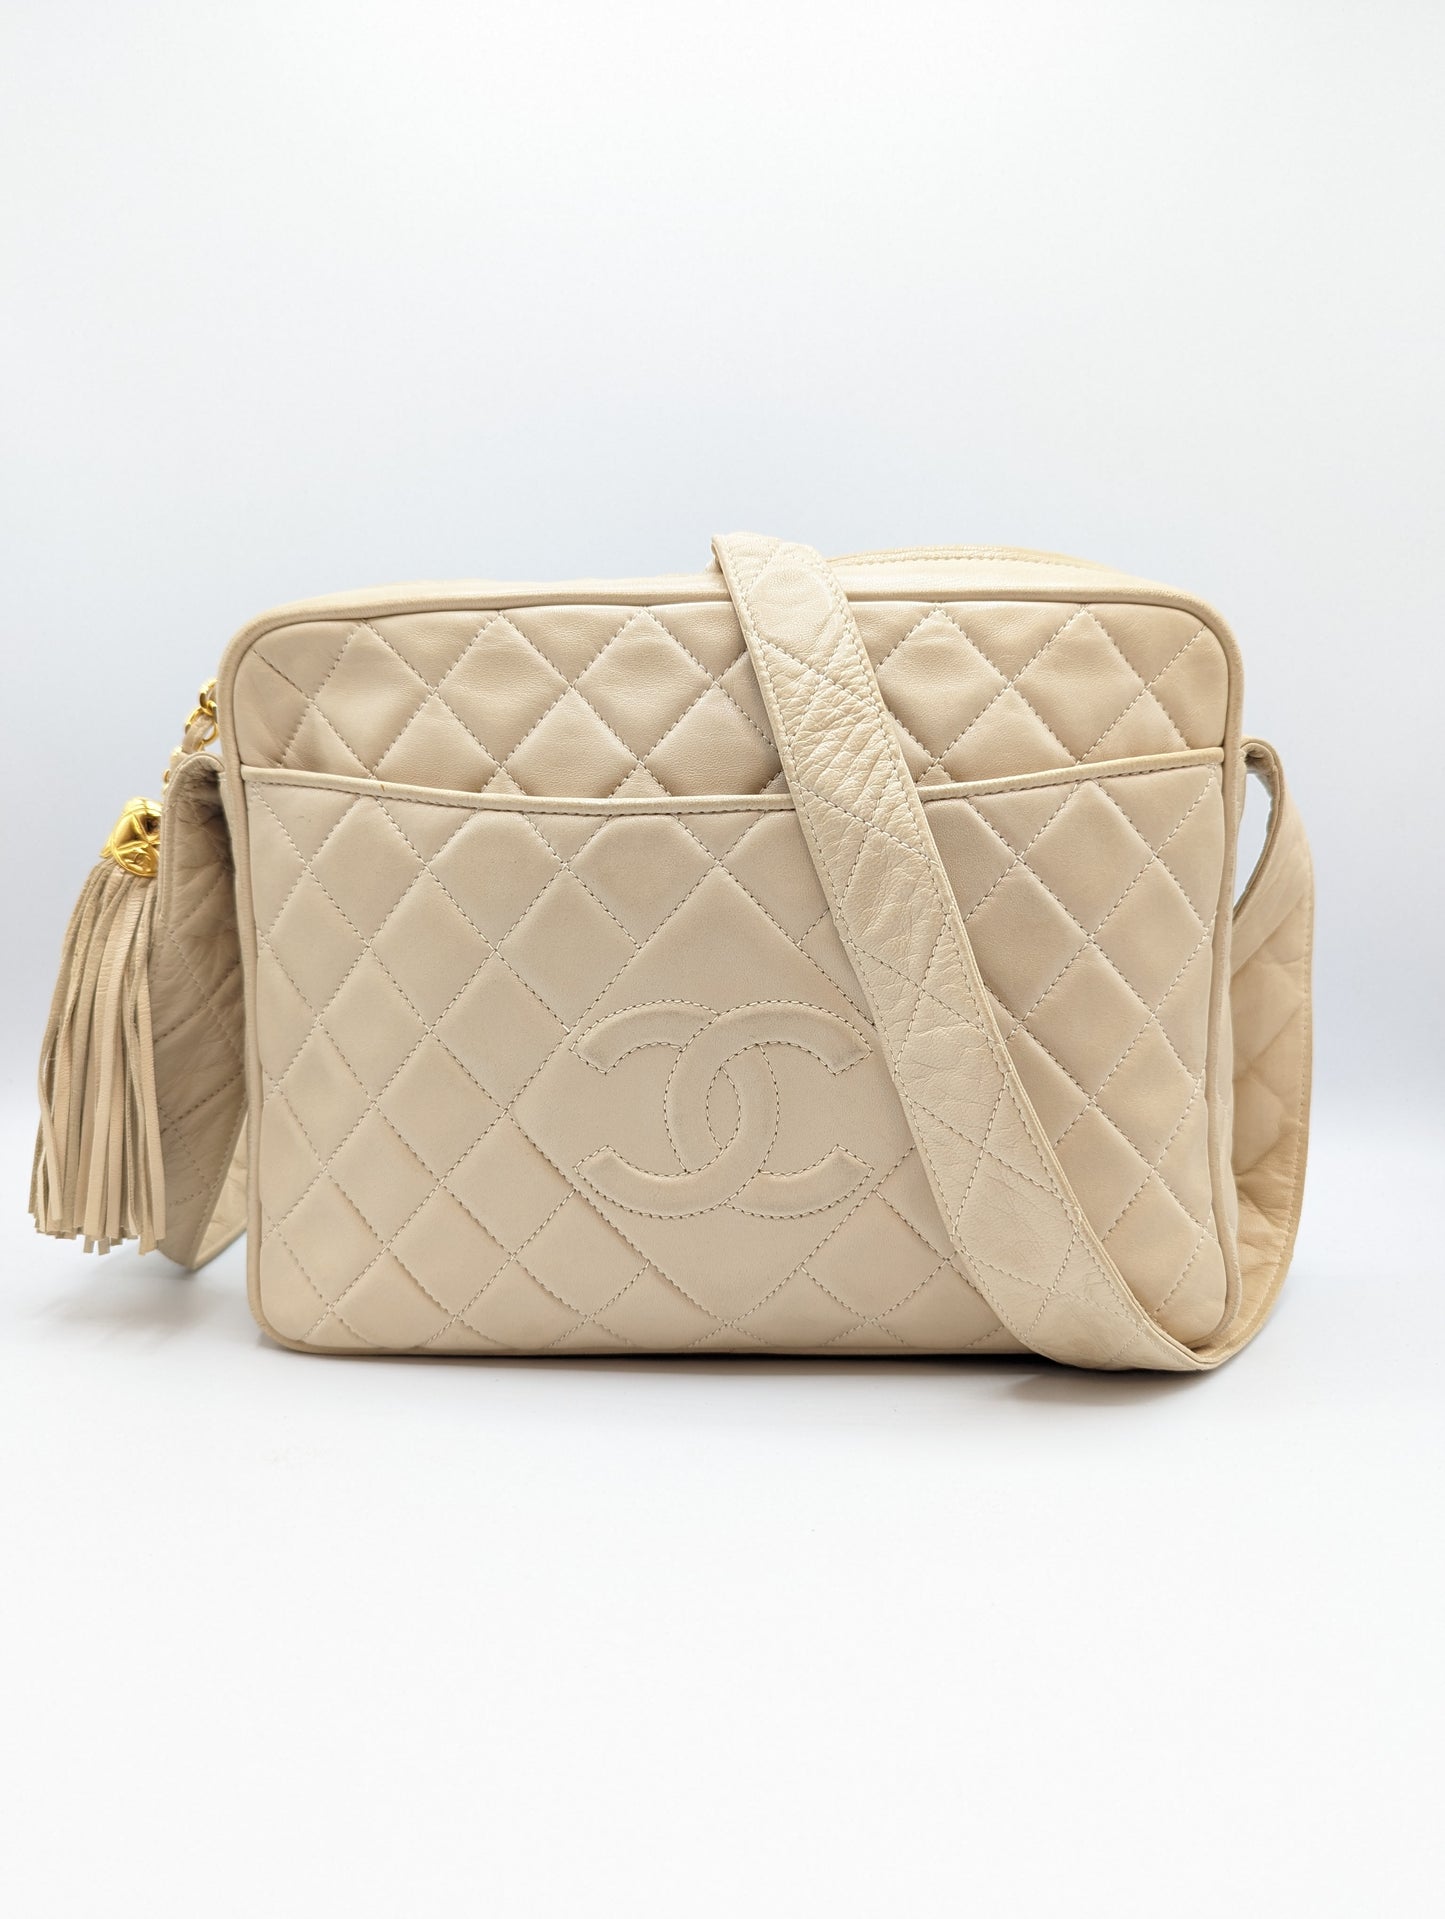 Chanel Beige Quilted Lambskin CC Camera Bag